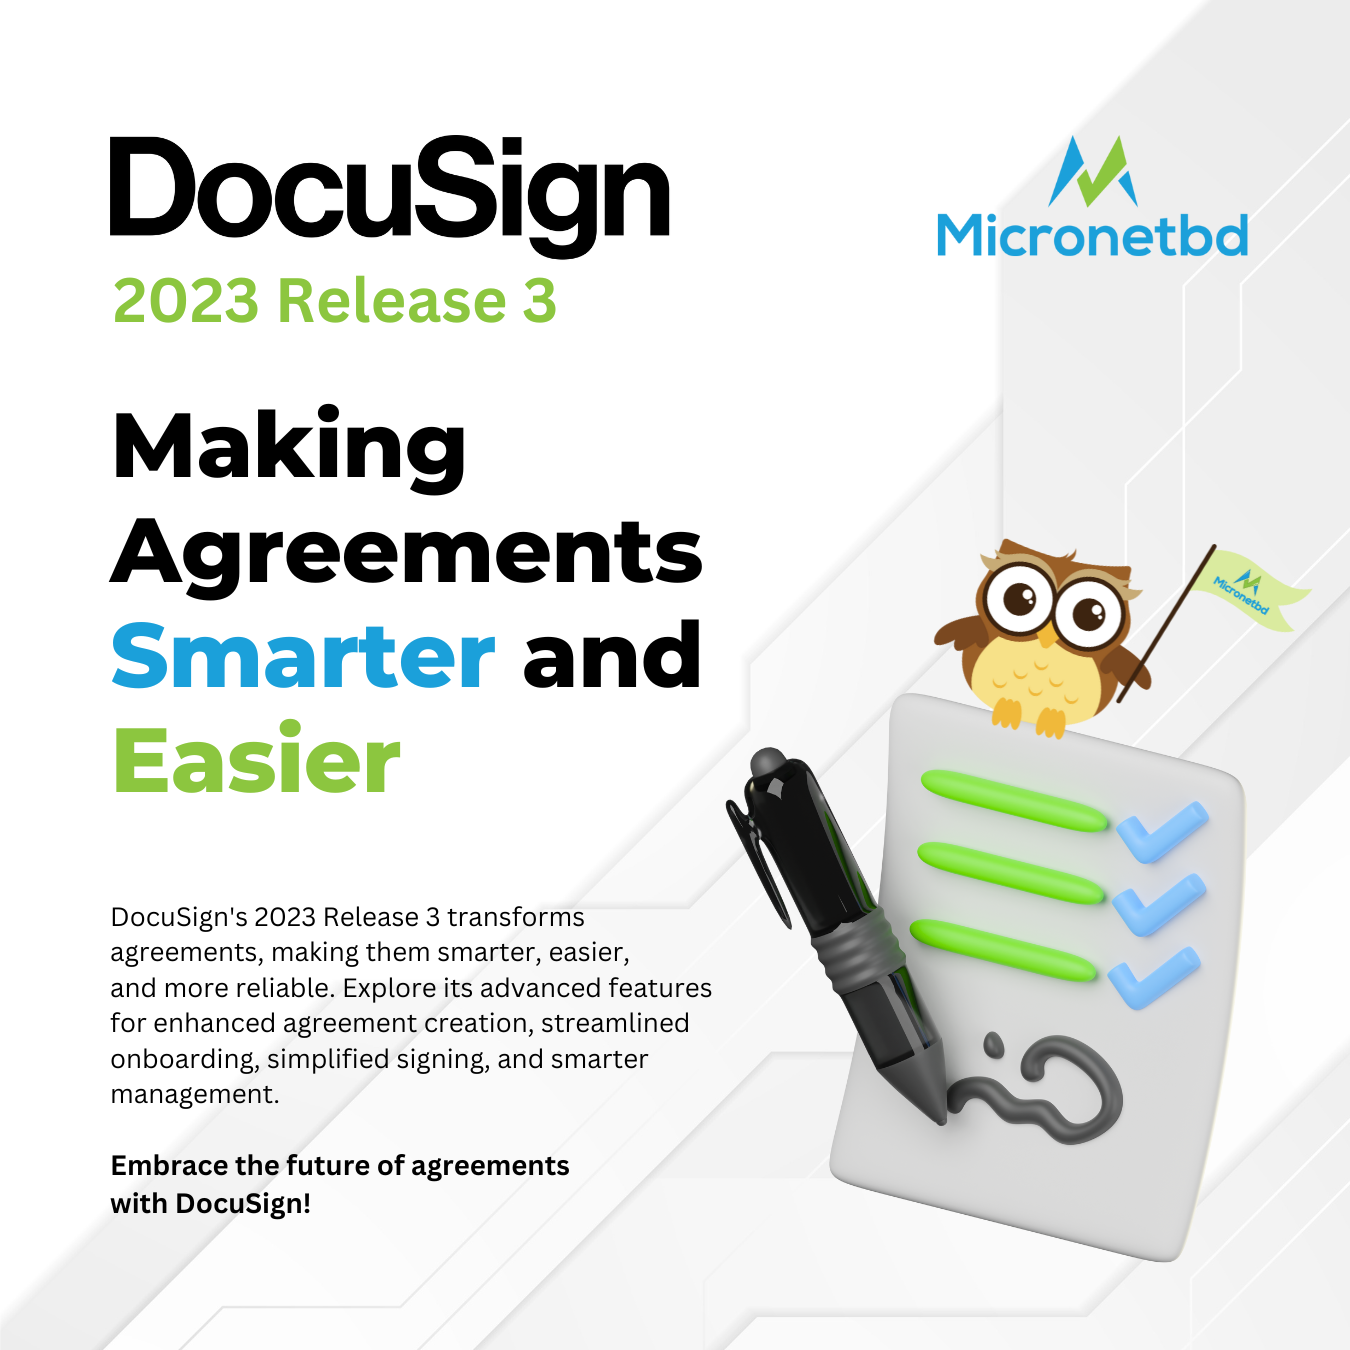 A promotional graphic for "DocuSign 2023 Release 3." The main text reads "Making Agreements Smarter and Easier." There's an illustration of a tablet with a green-checkmark-list and a cute owl character with glasses holding a flag with the "Micronetbd" logo. Below the main text, there's a description about DocuSign's features, including the phrase "Embrace the future of agreements with DocuSign!